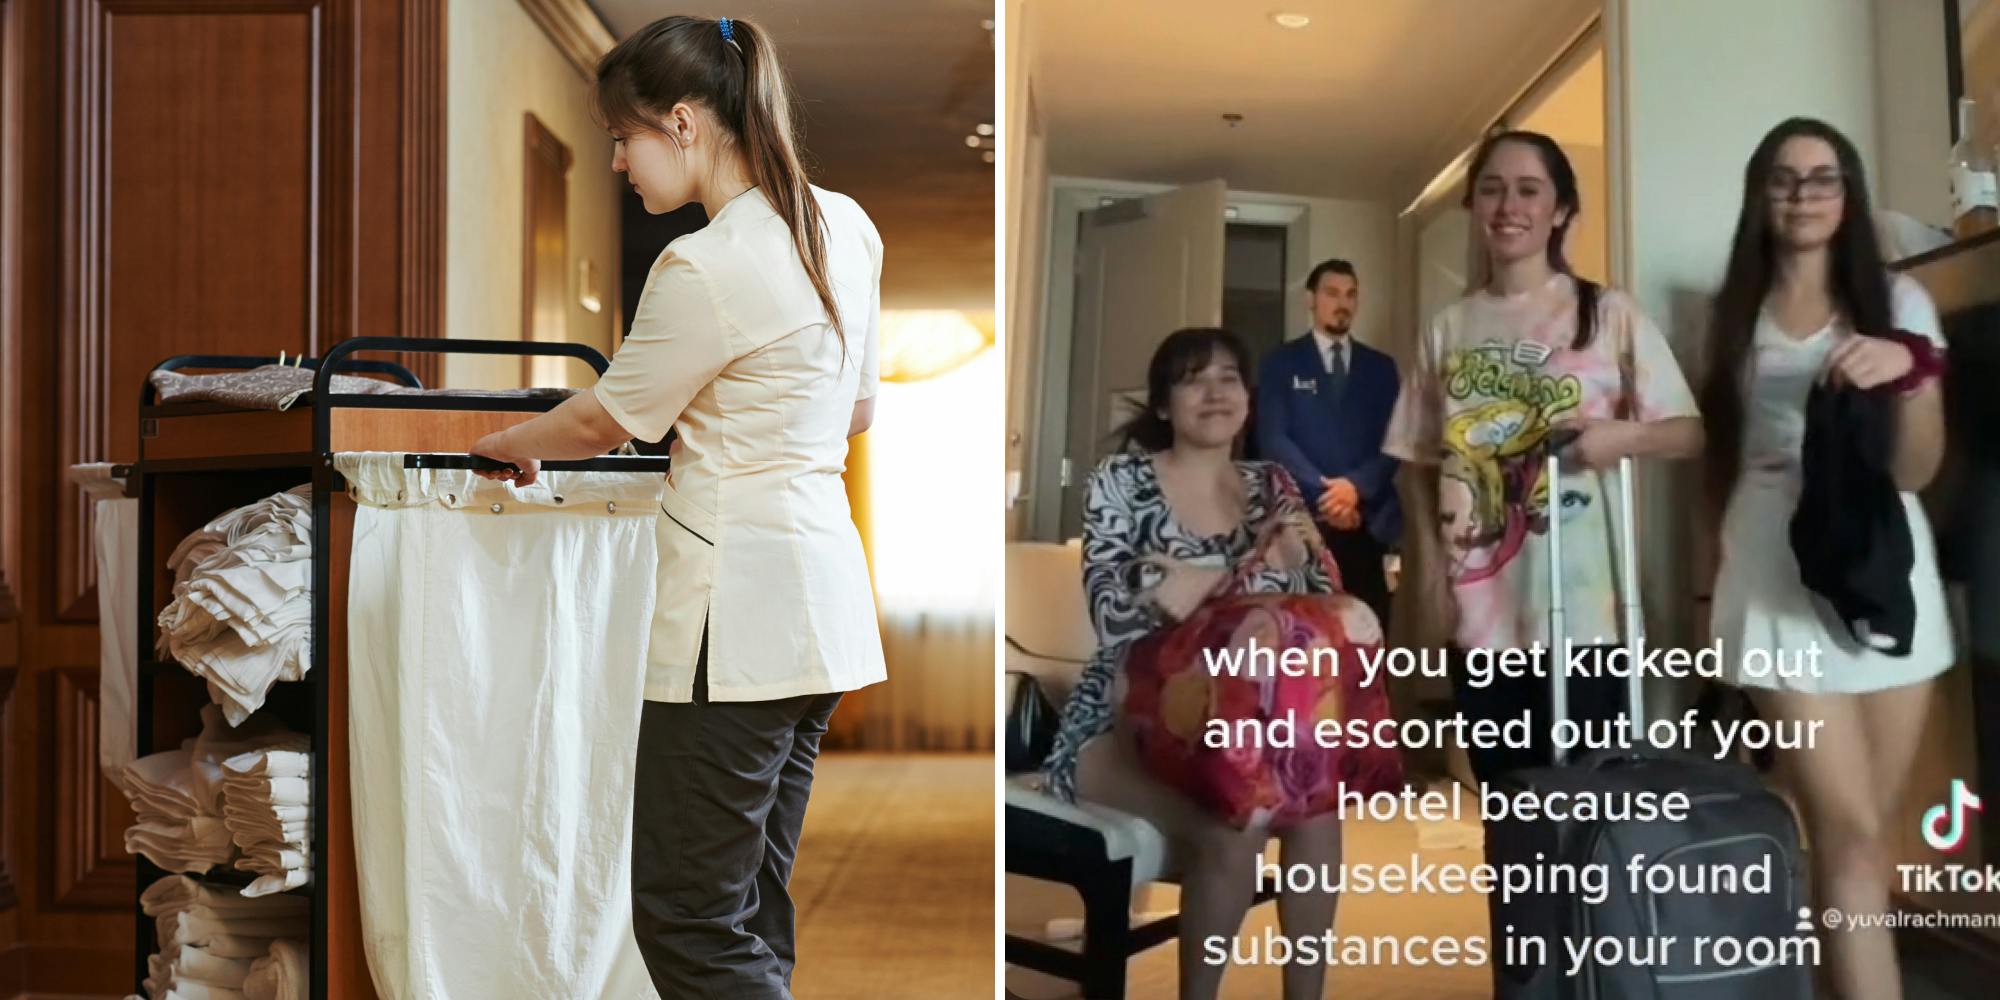 house keeping cart and hotel worker (l) group of girls in hotel room with man in suit behind caption "when you get kicked out and escorted out of your hotel because housekeeping found substances in your room" (r)